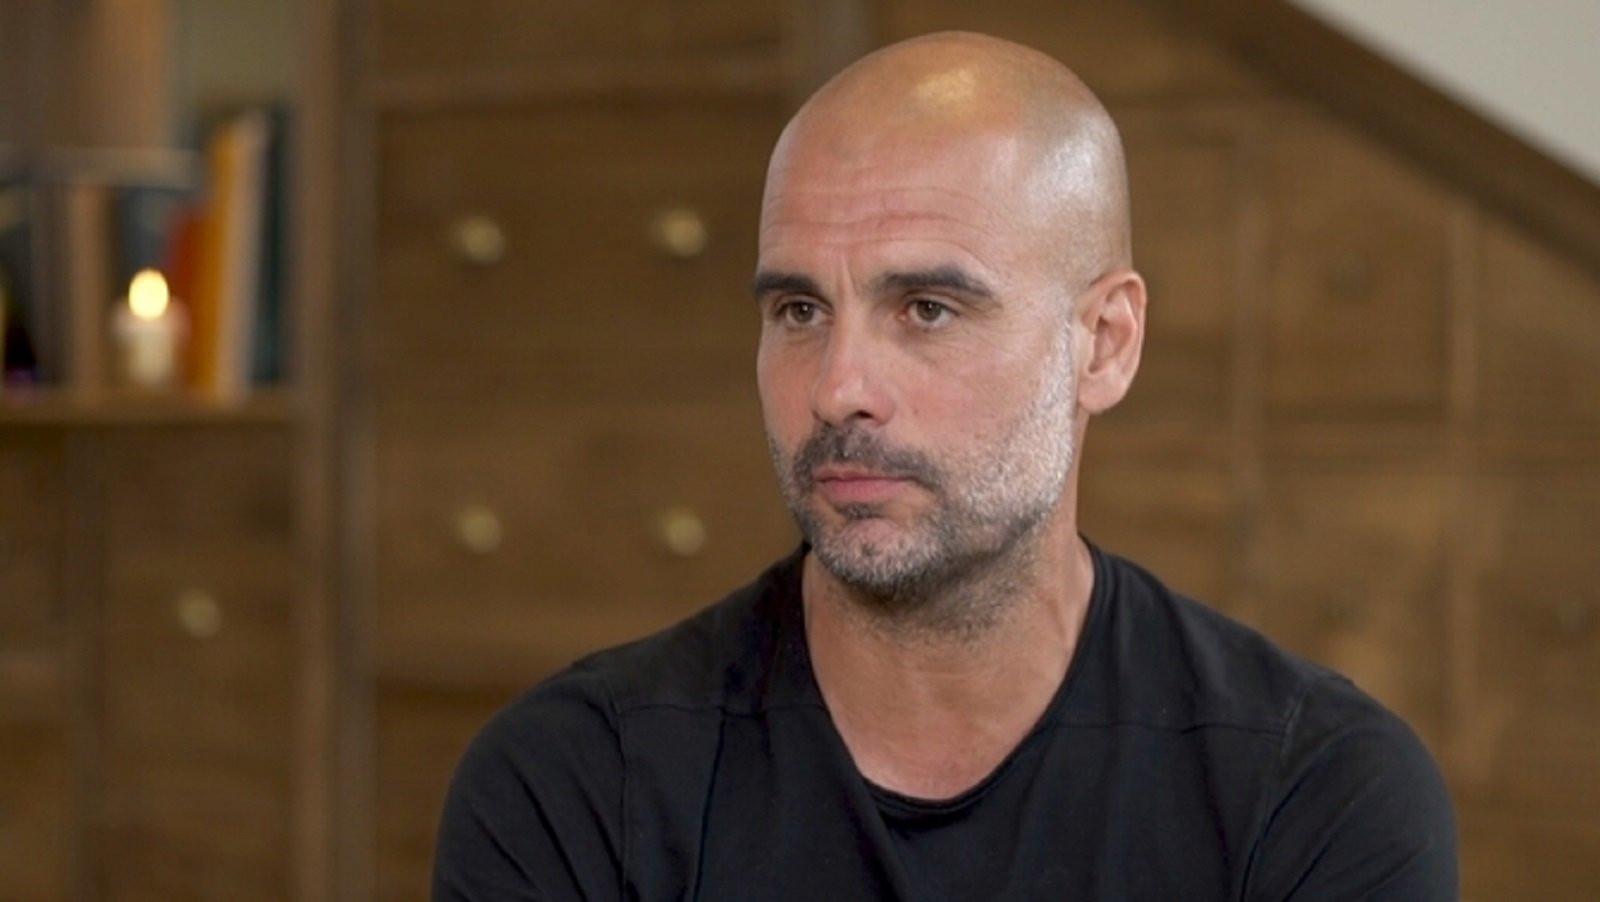 Pep Guardiola: "30 years' jail for standing on the roof of a car: is that fair?"